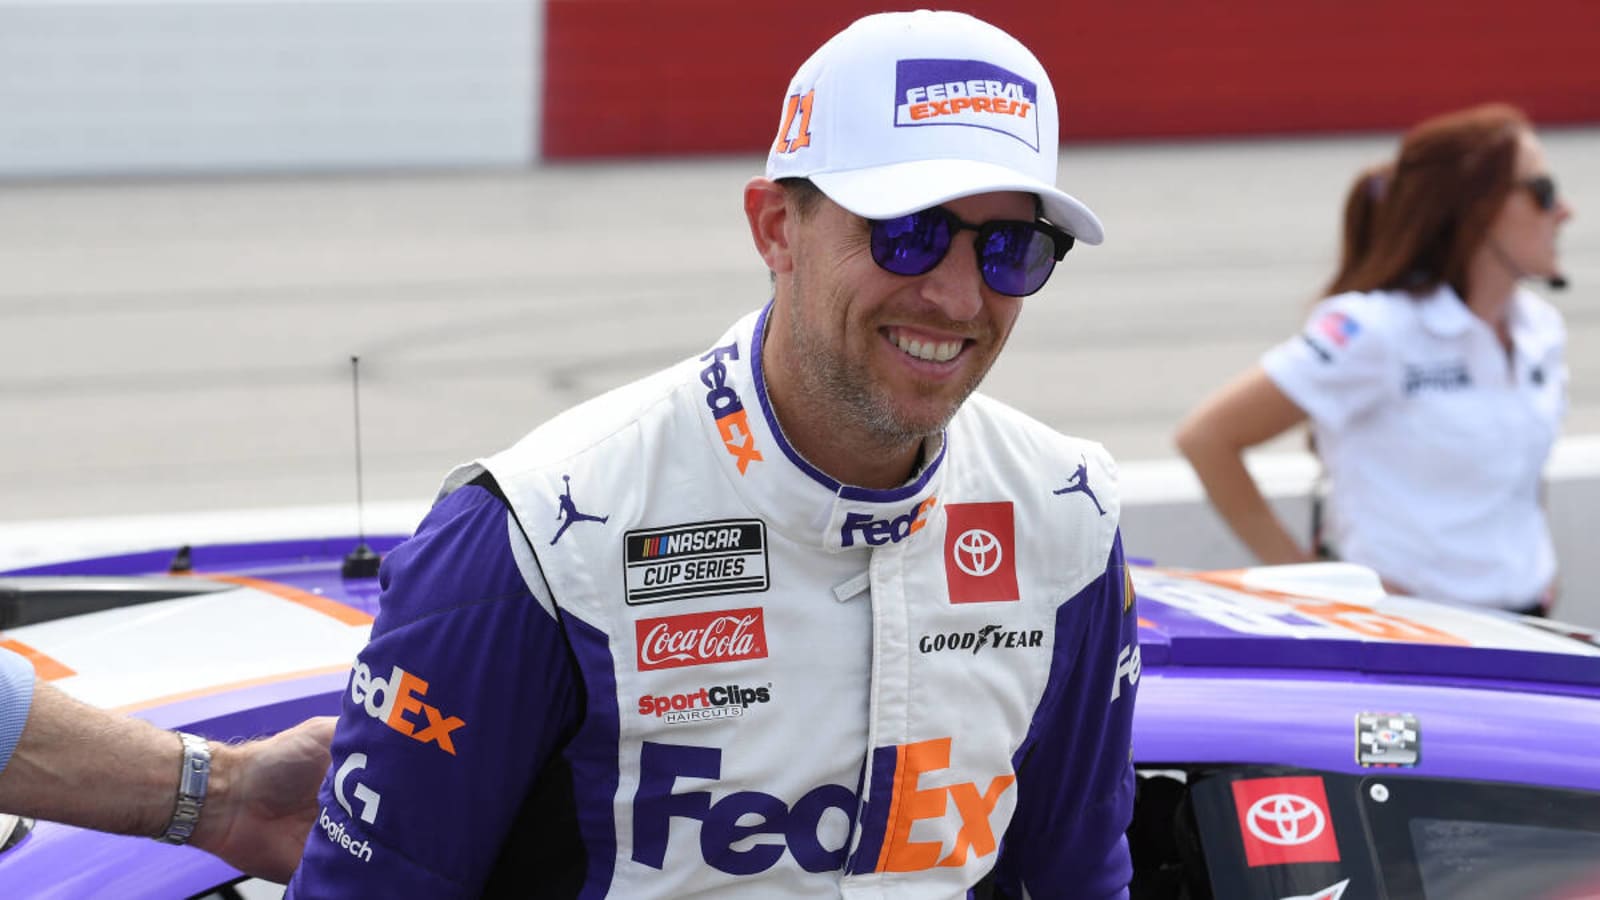 Denny Hamlin thinks Ross Chastain is underperforming, should have more wins